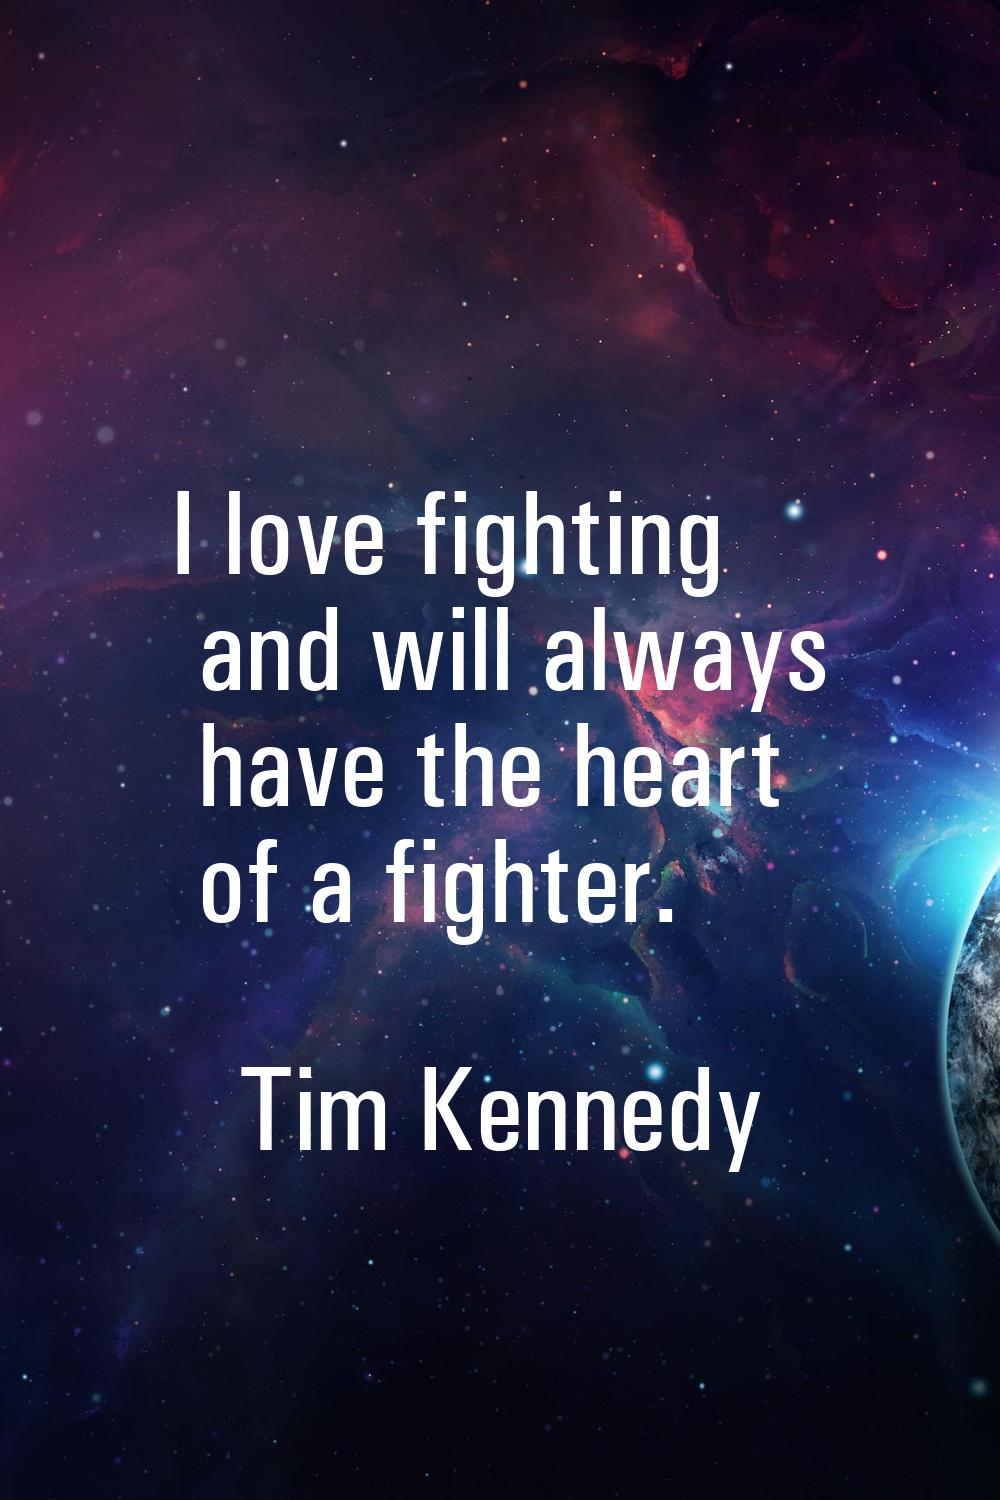 I love fighting and will always have the heart of a fighter.